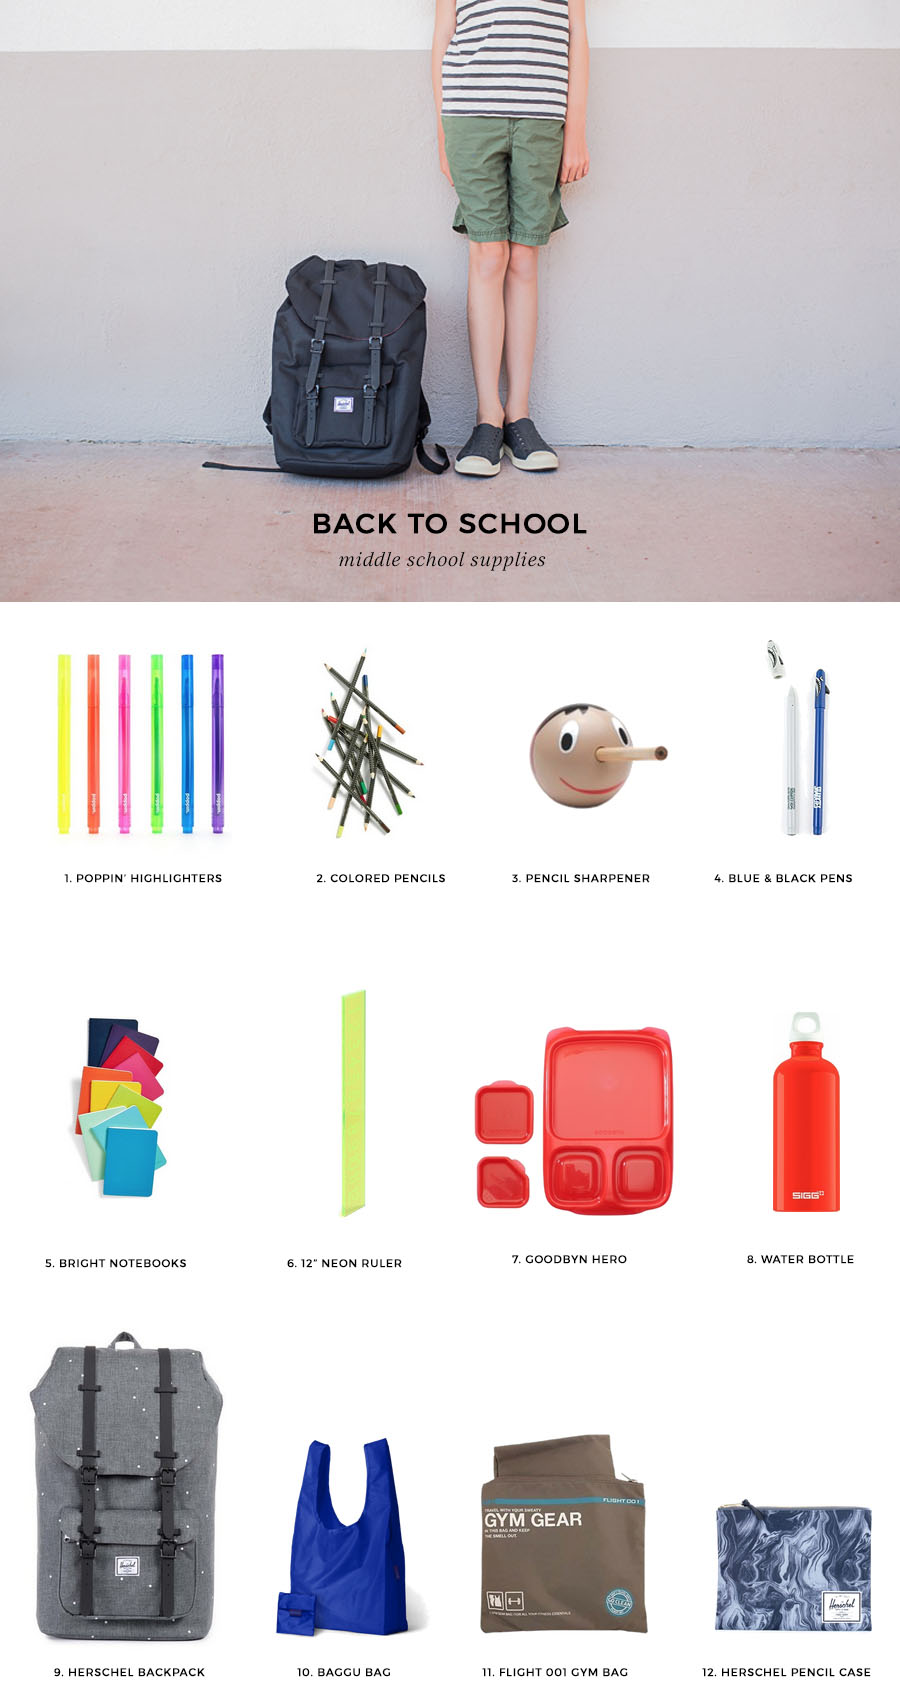 Back to School - Middle School Supplies